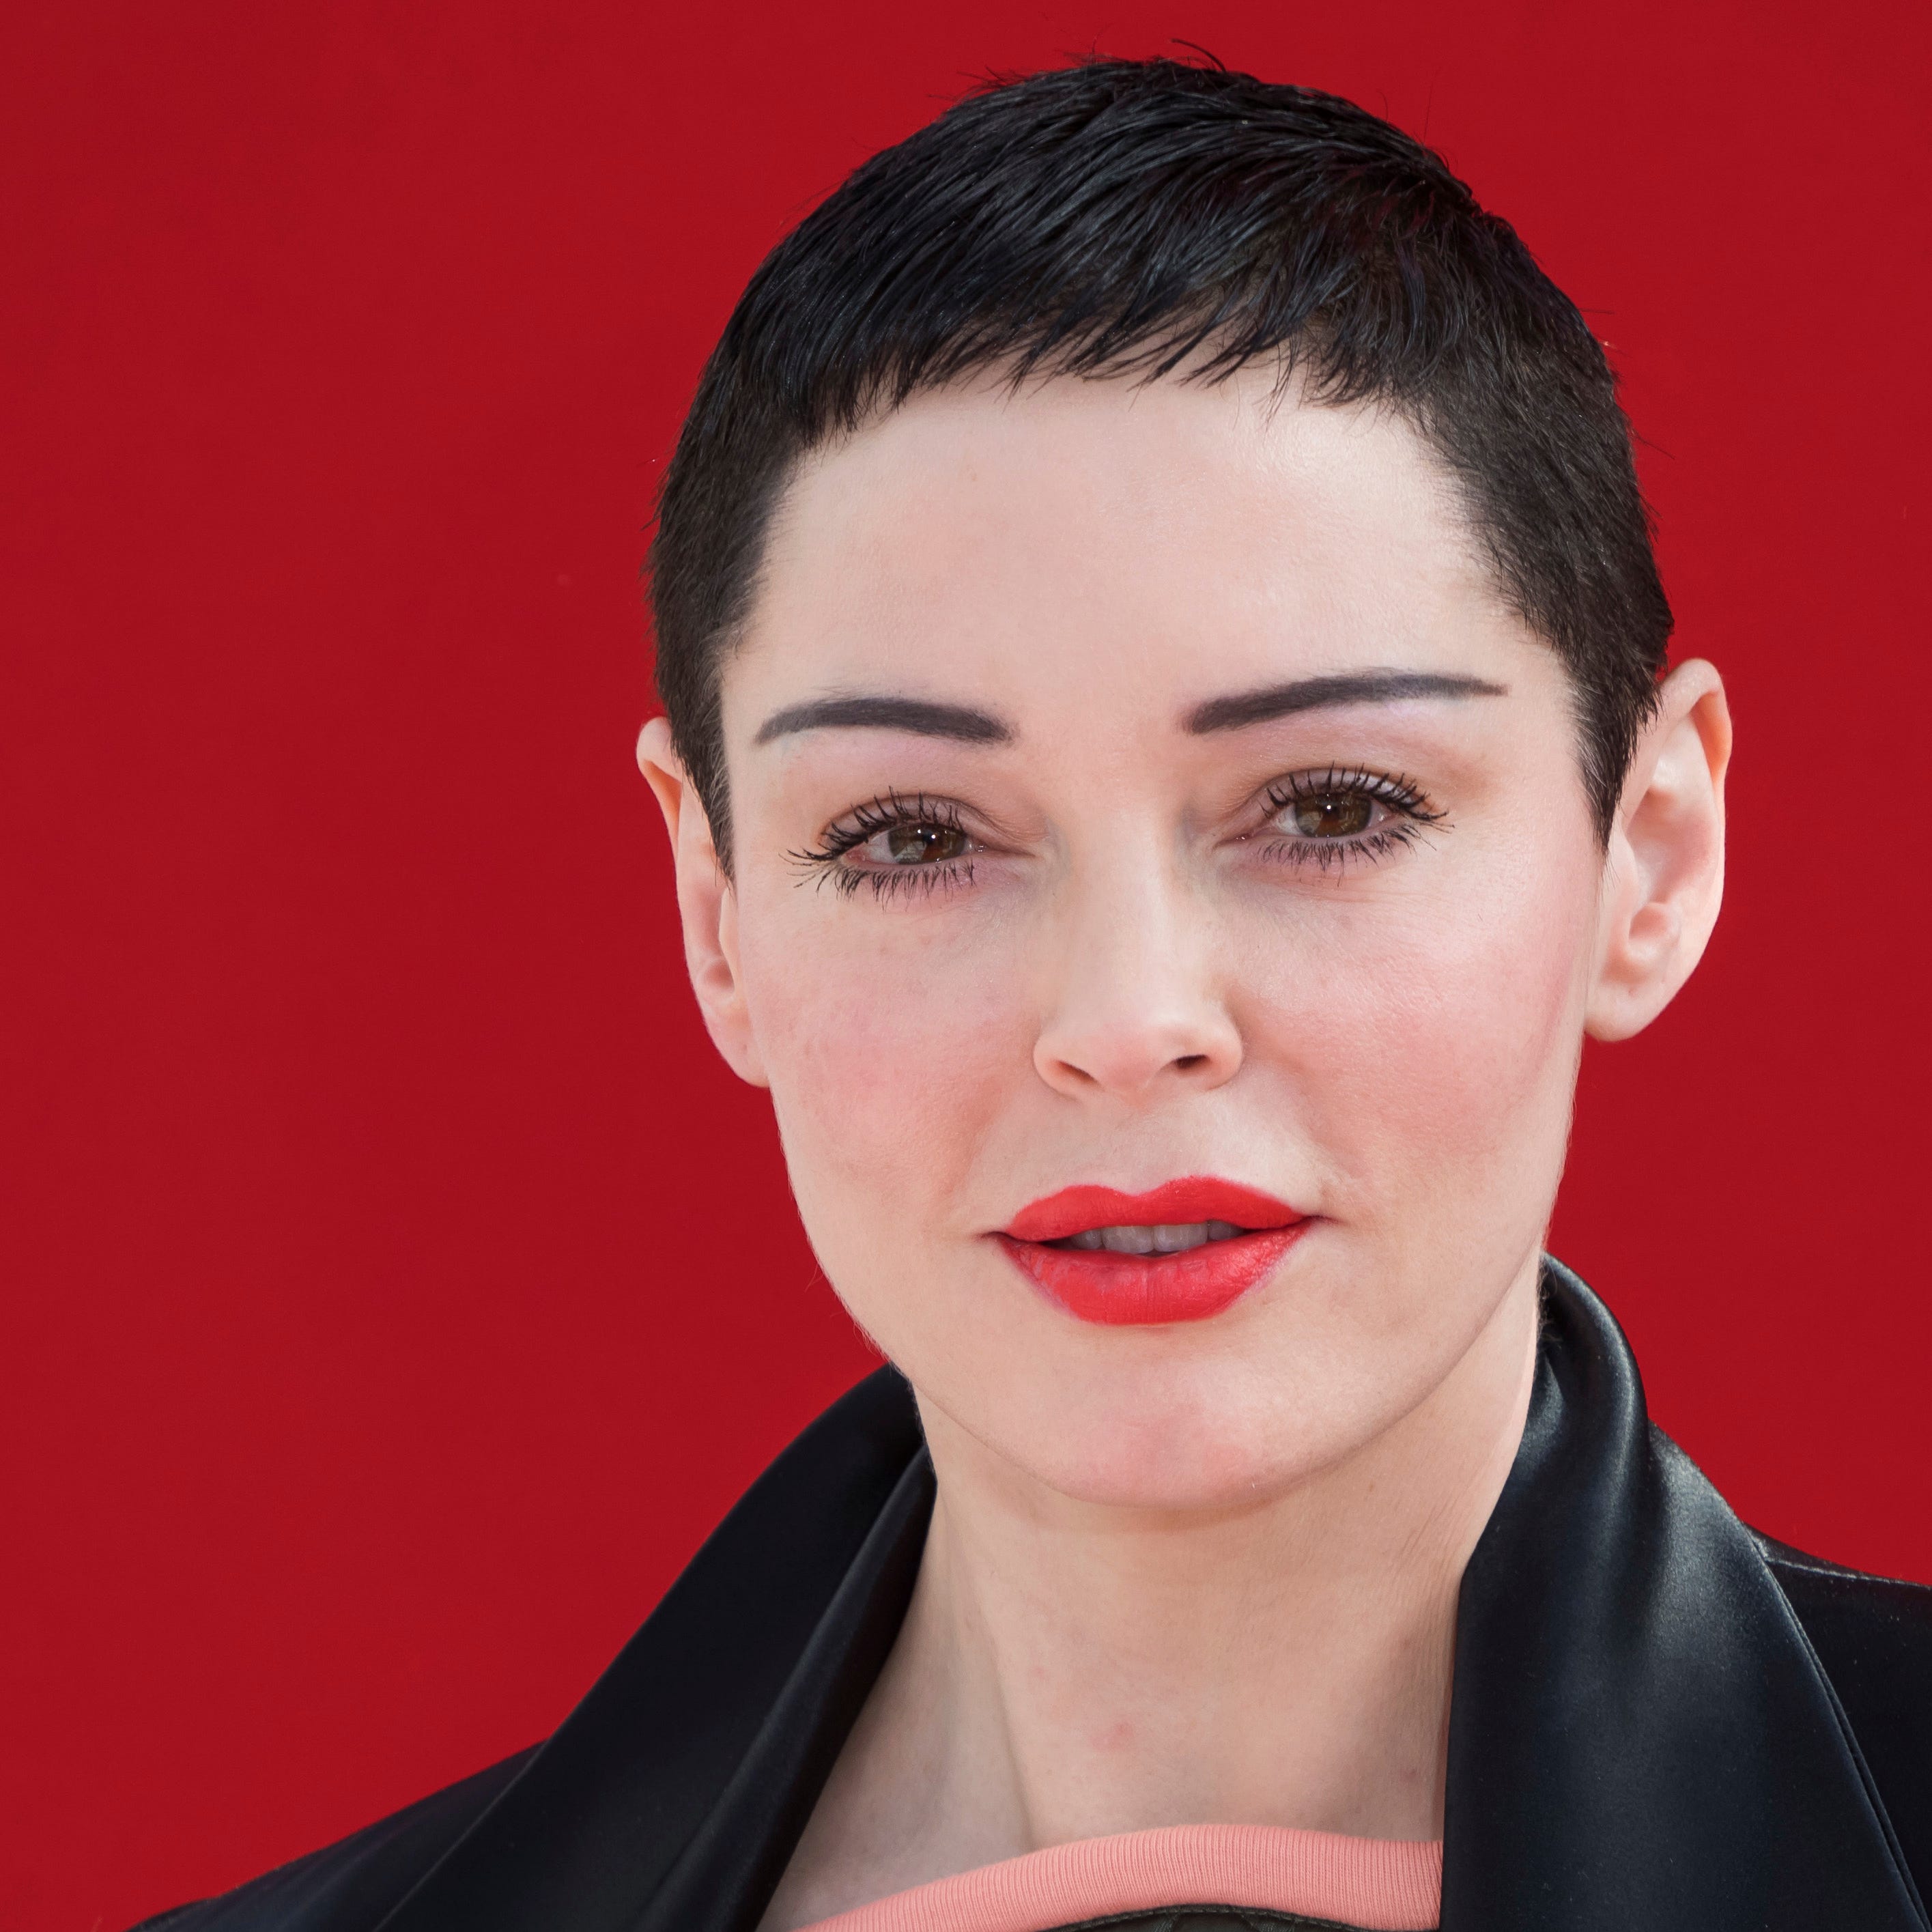 Rose McGowan poses before a fashion show in Paris, March 3, 2018.